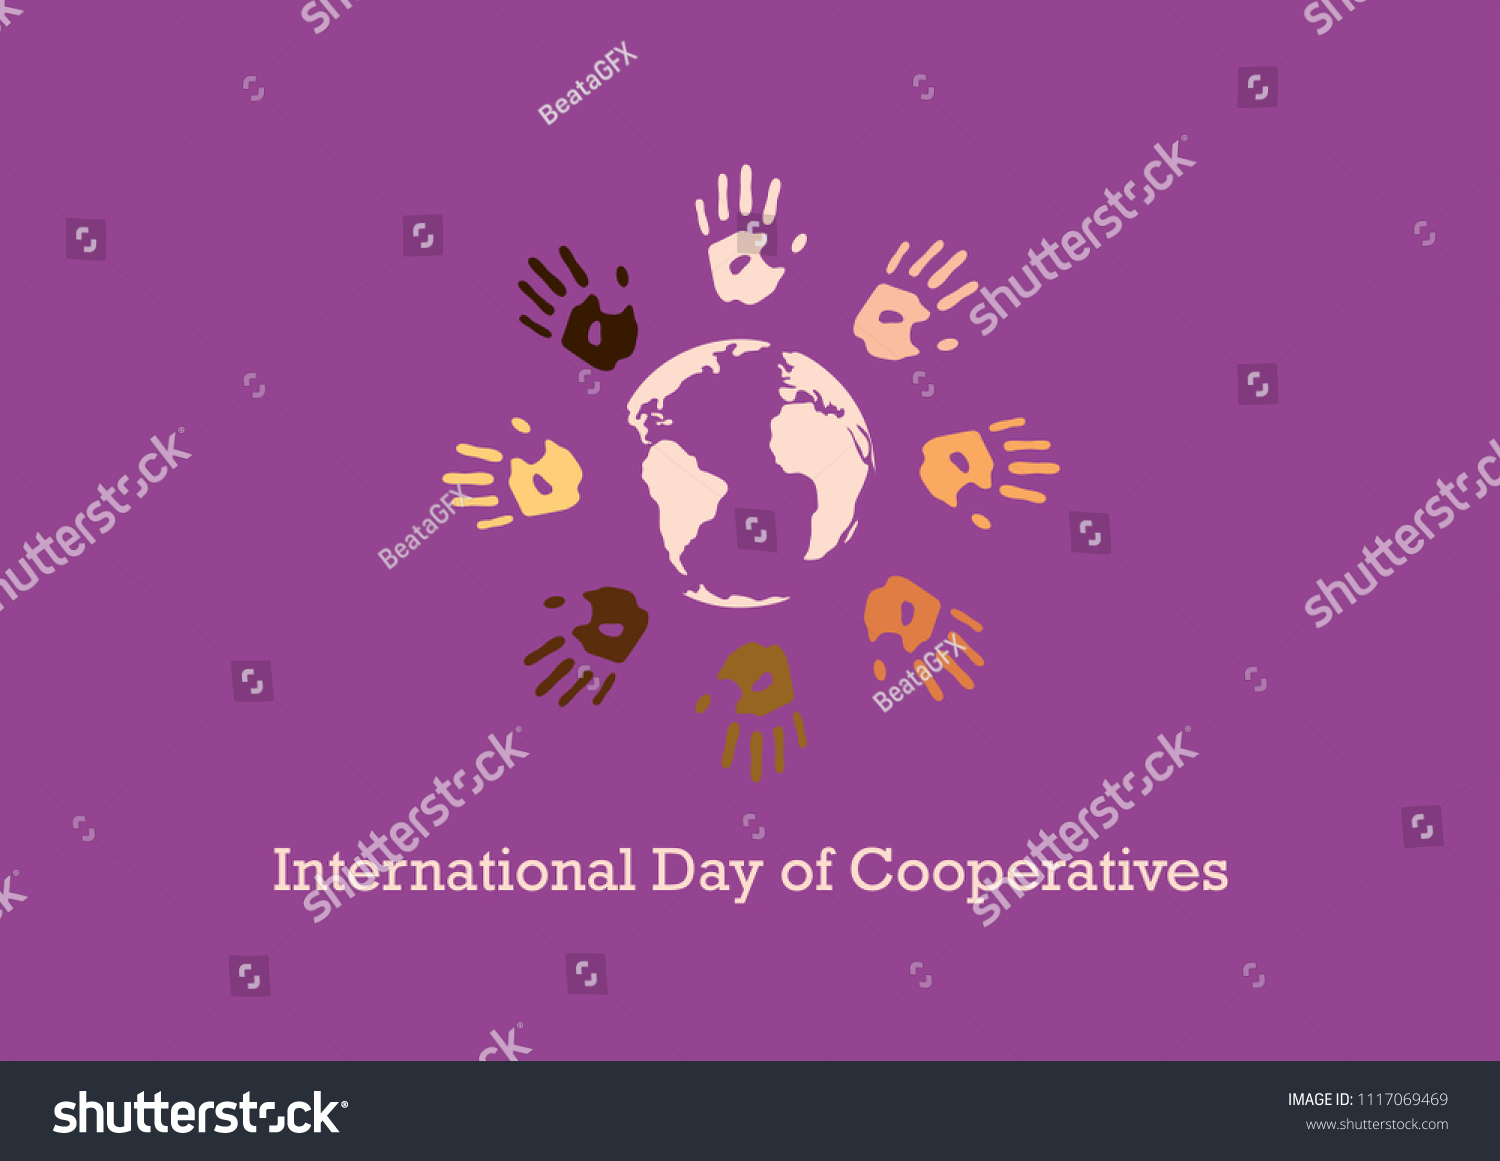 International Day Cooperatives Vector Human Cooperation Stock Vector Royalty Free 1117069469 4807